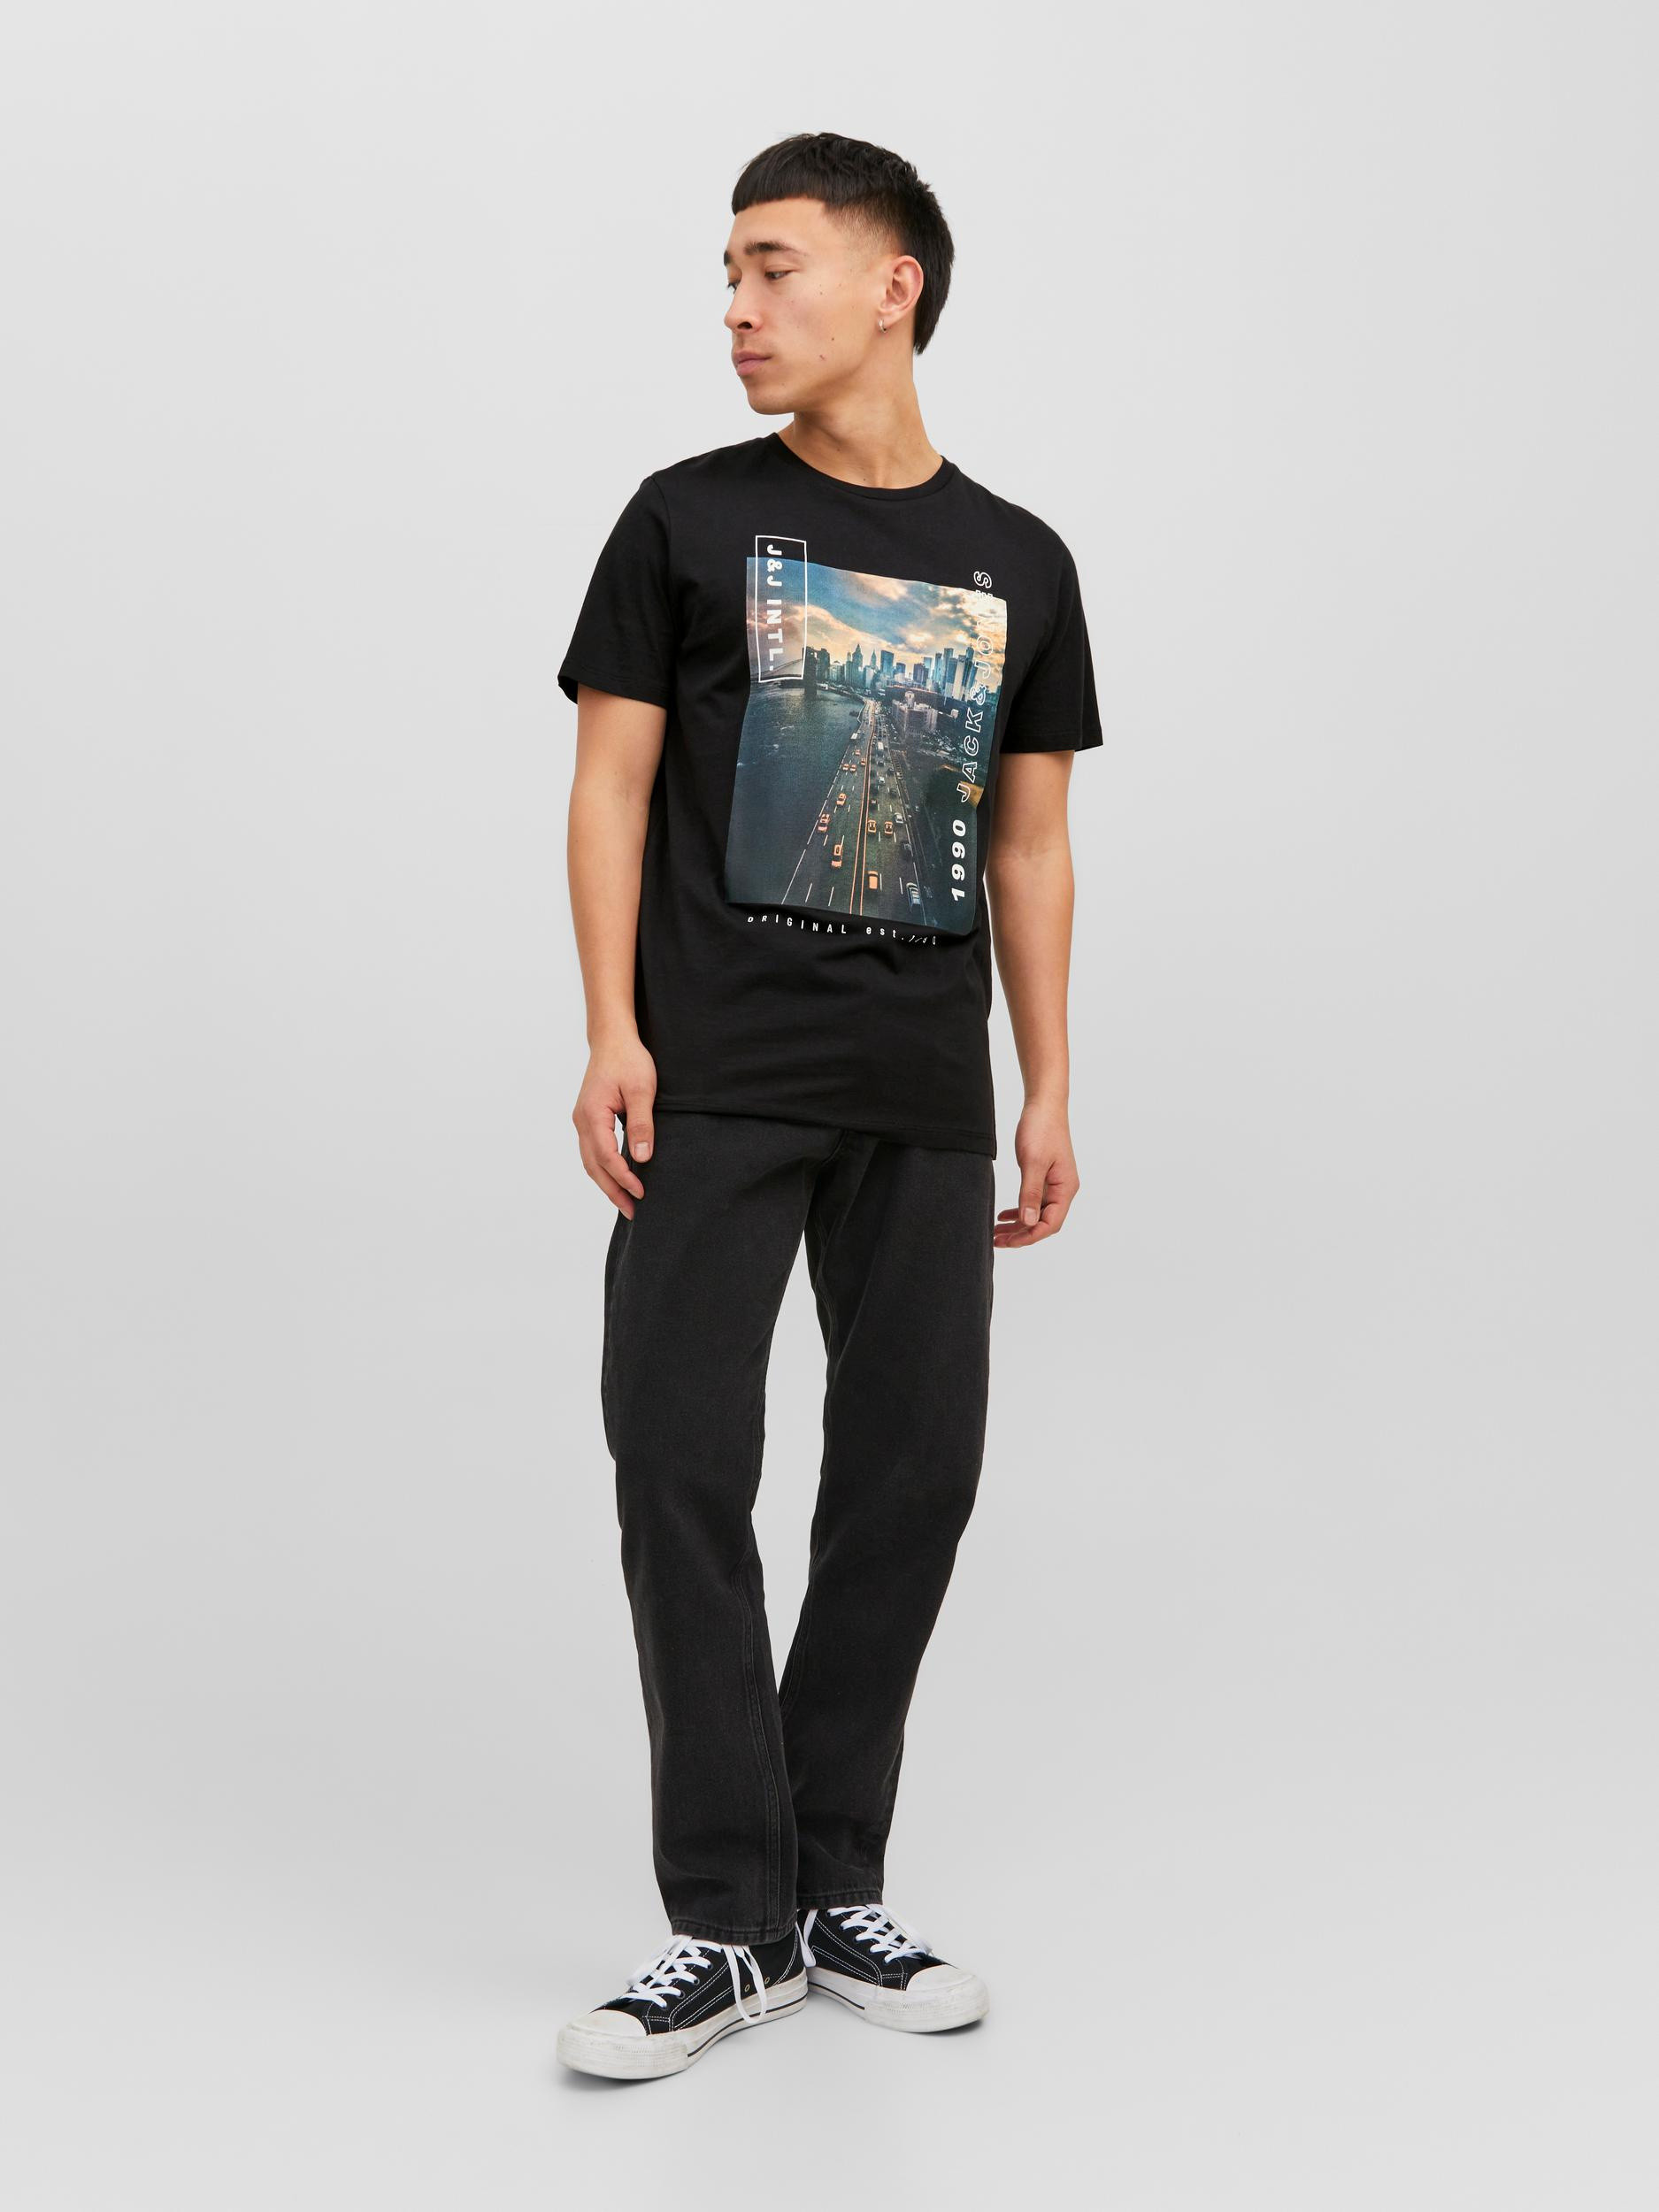 Jack & Jones -T-shirt in cotone con stampa, Nero, large image number 1